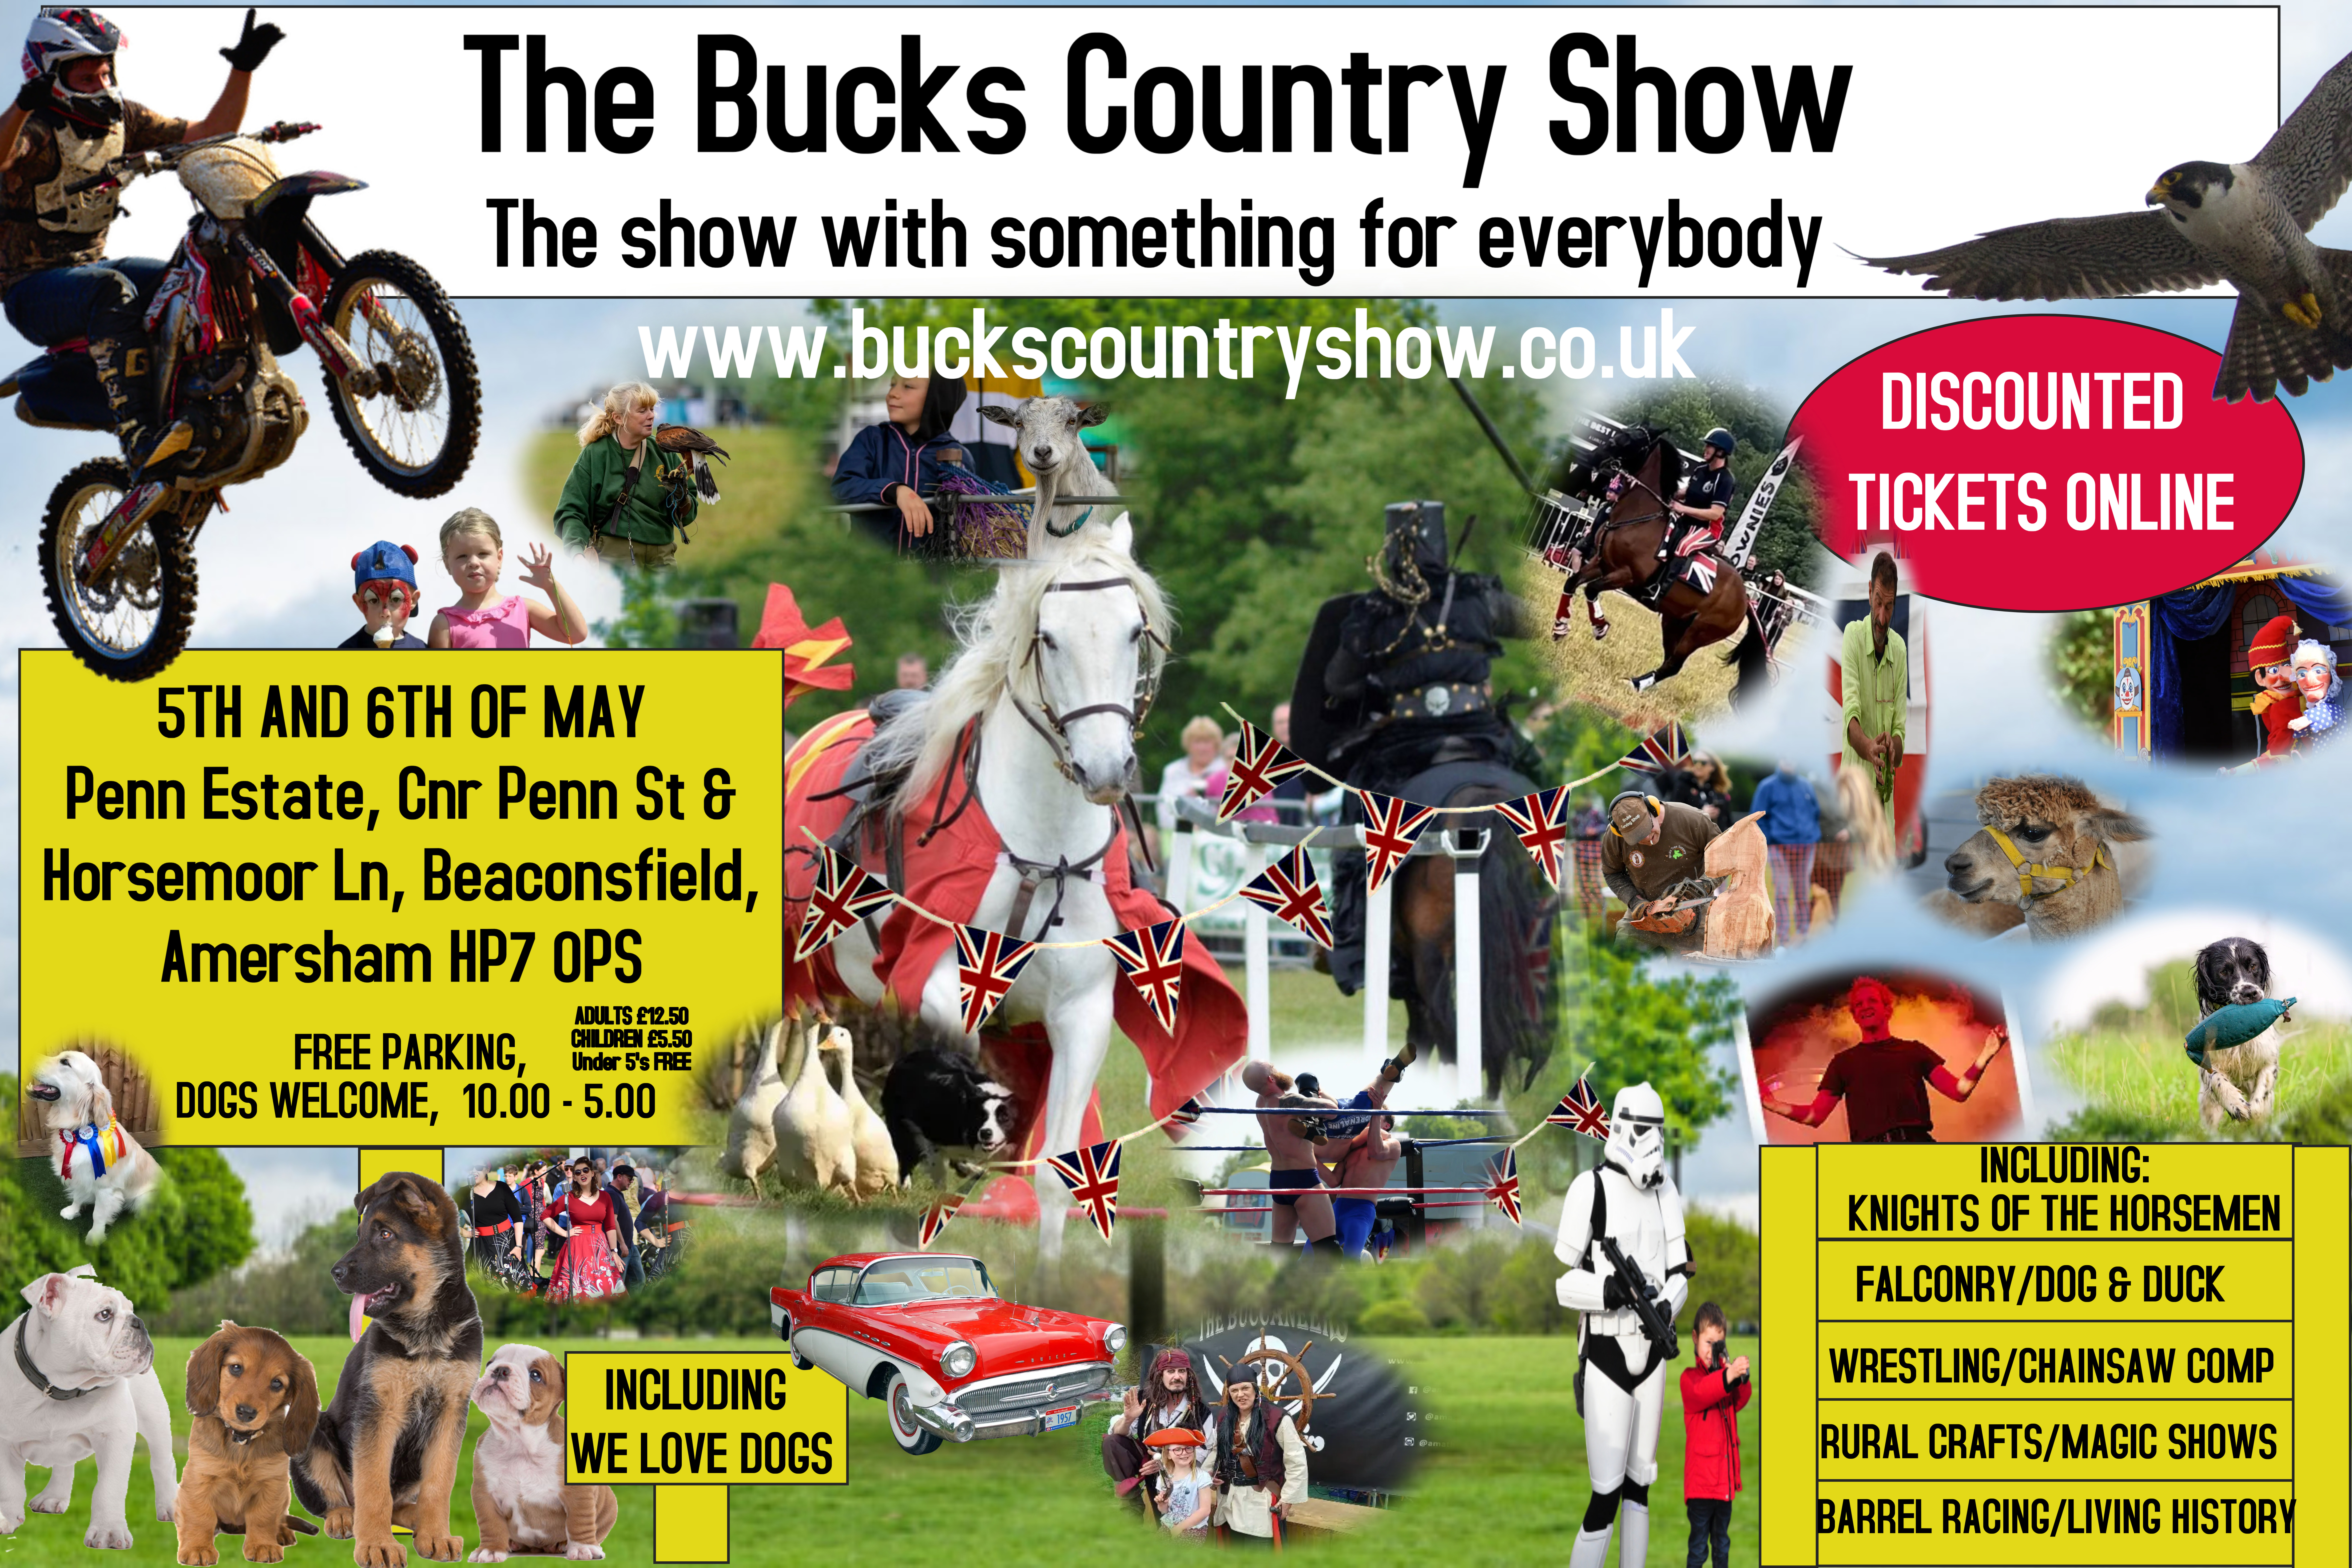 The Bucks Country Show poster